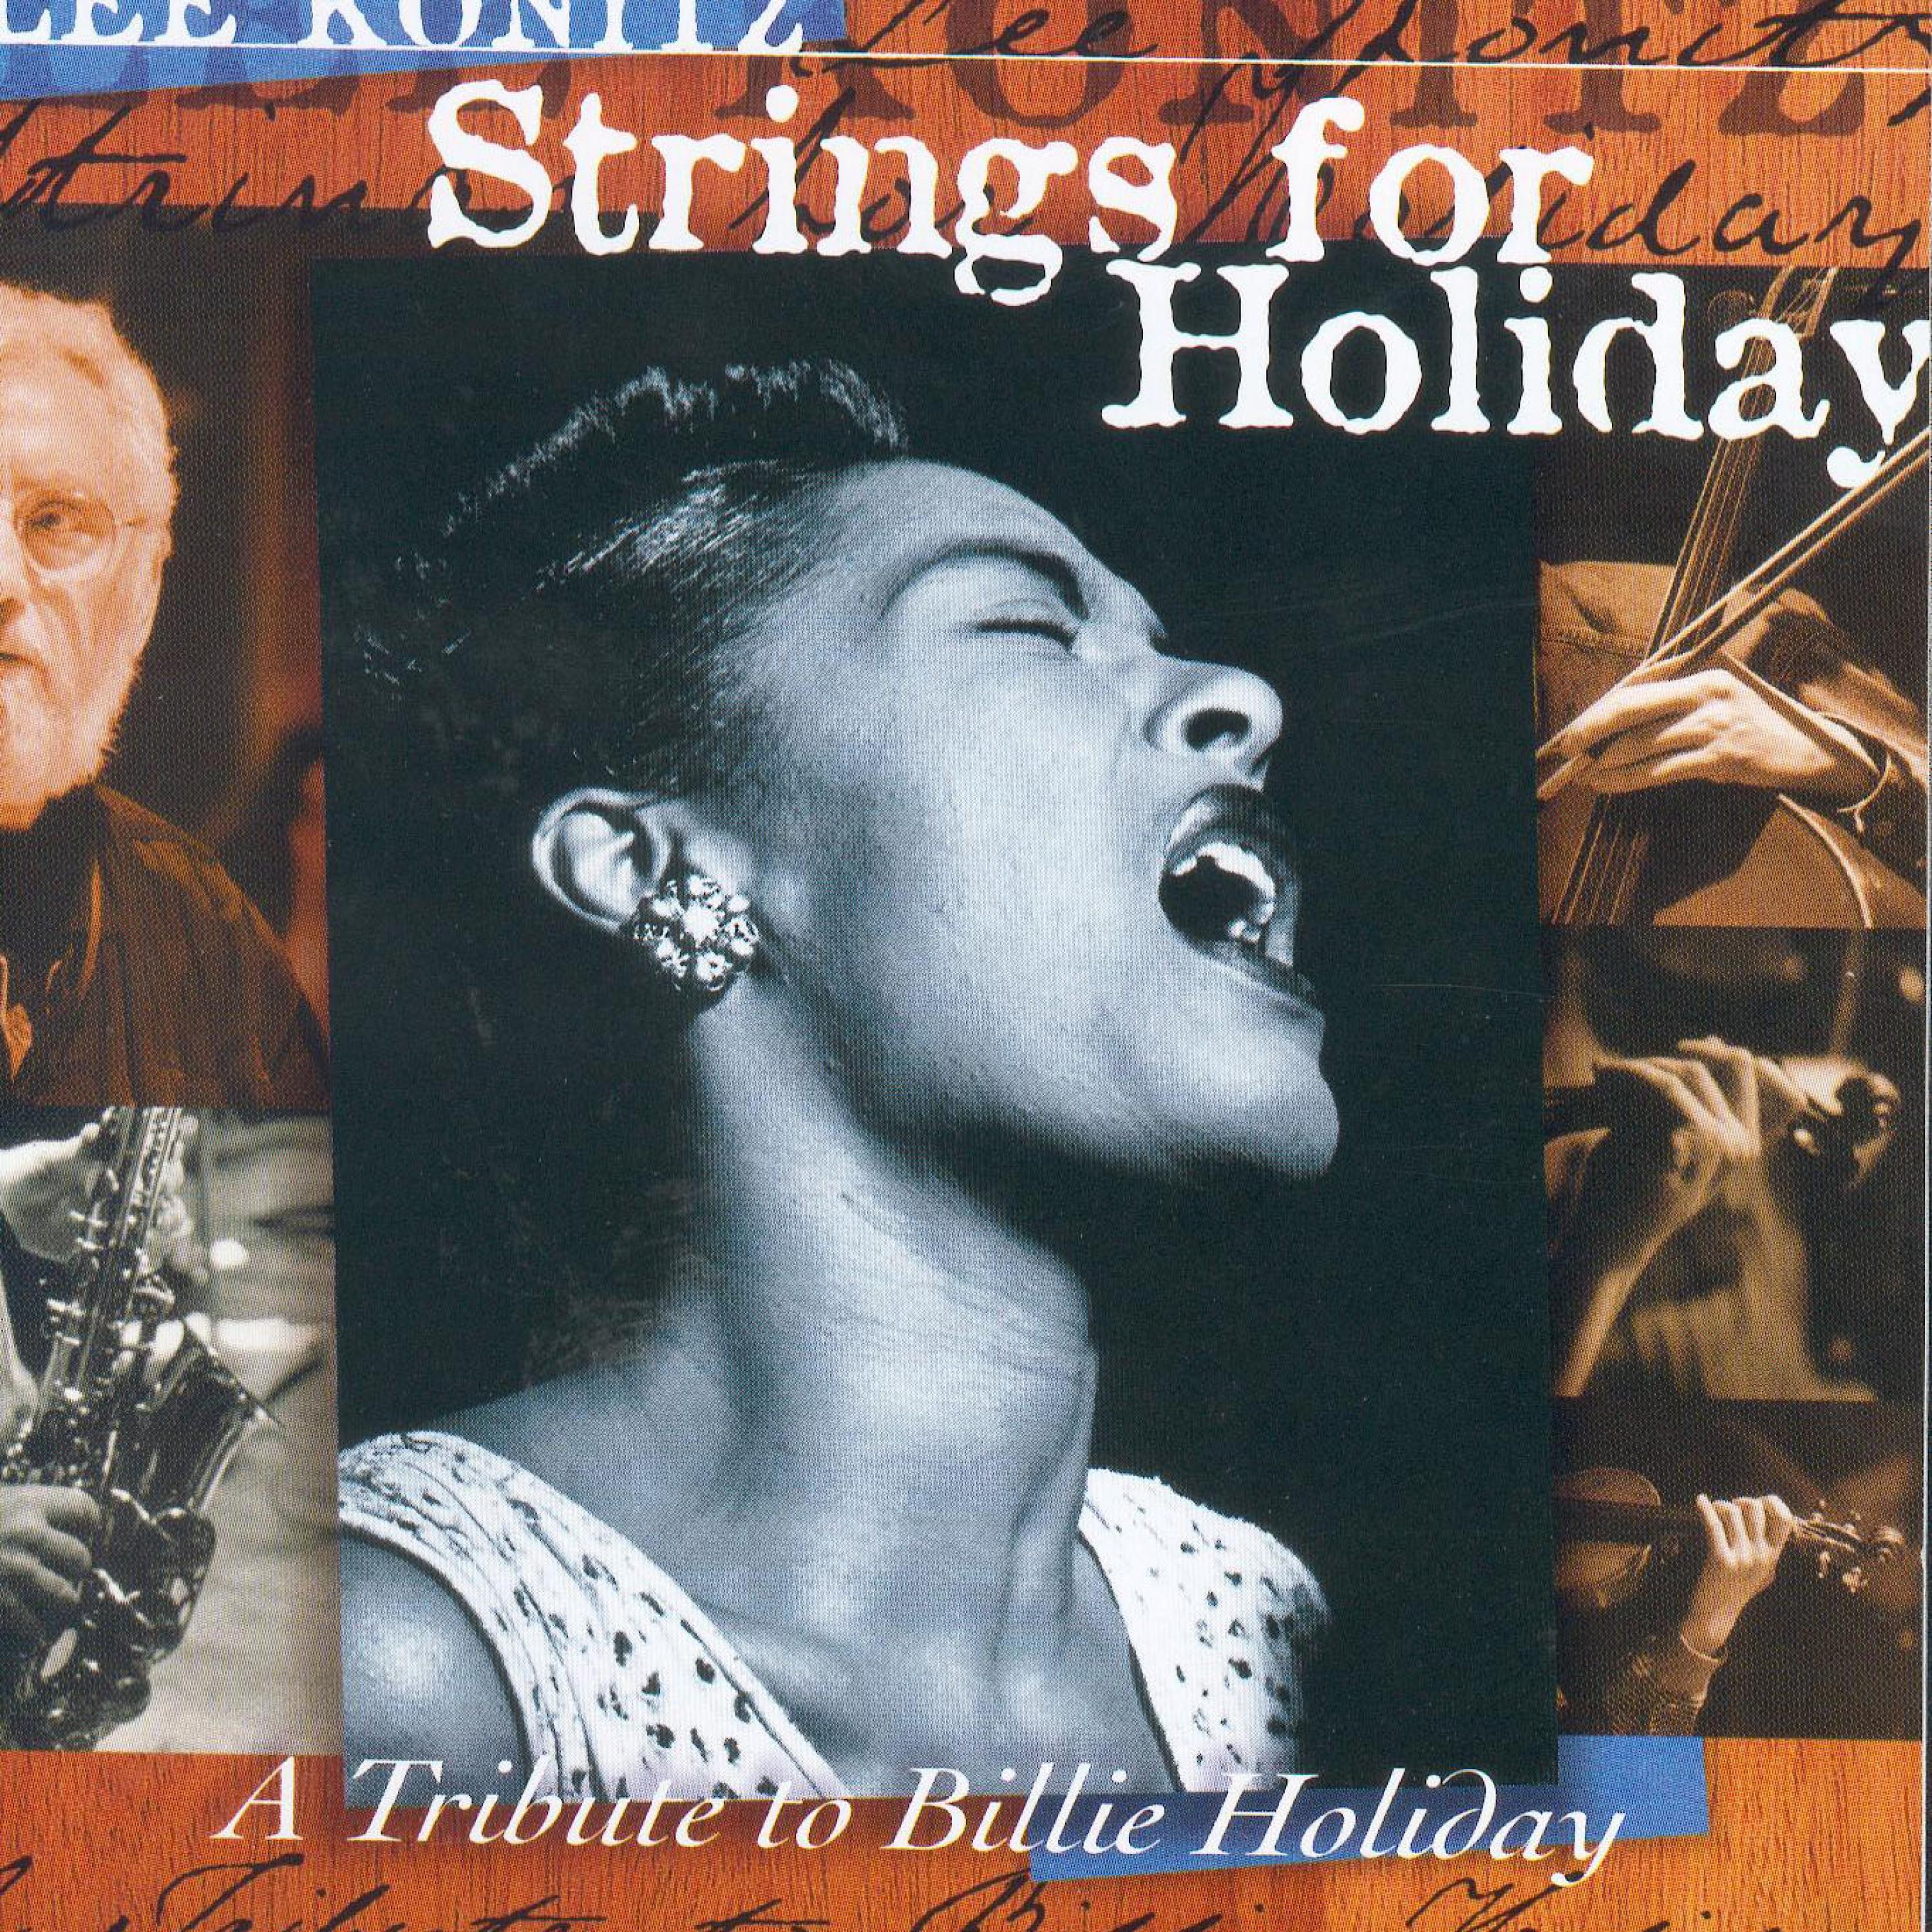 Strings for Holiday (A Tribute to Billy Holiday)